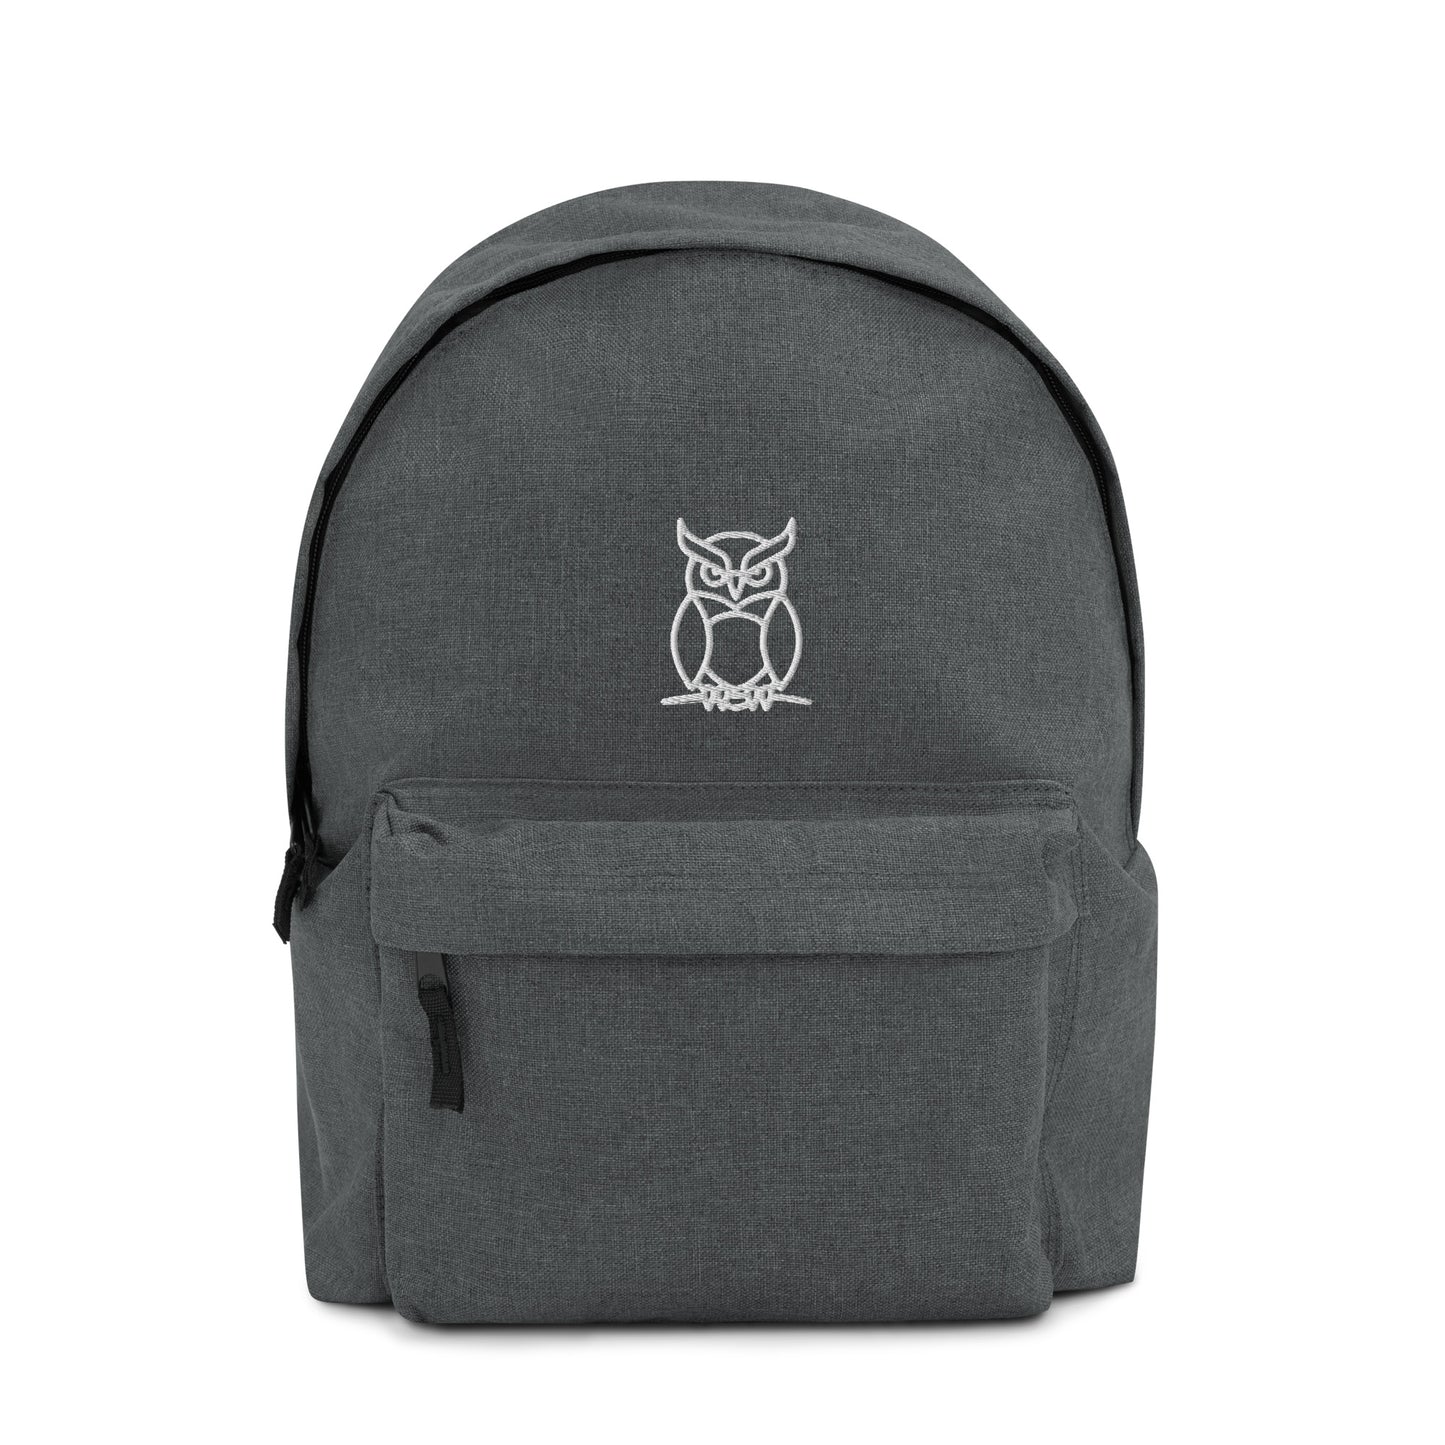 Embroidered OWL Backpack